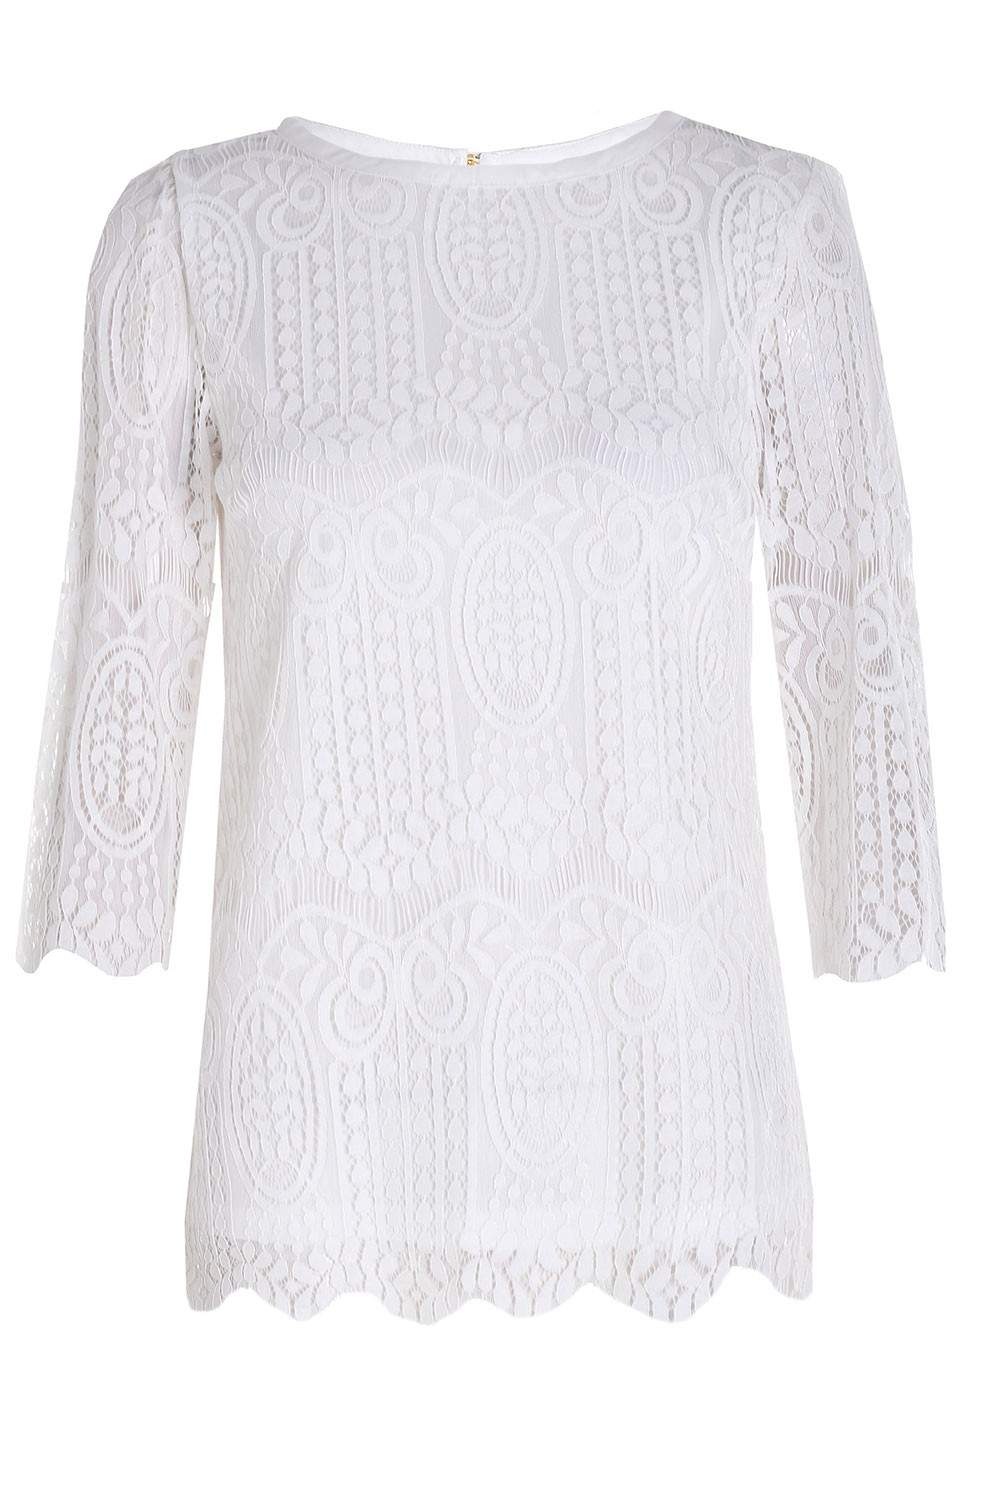 Marc Angelo Kendra Lace 3/4 Sleeve Top in Cream | iCLOTHING